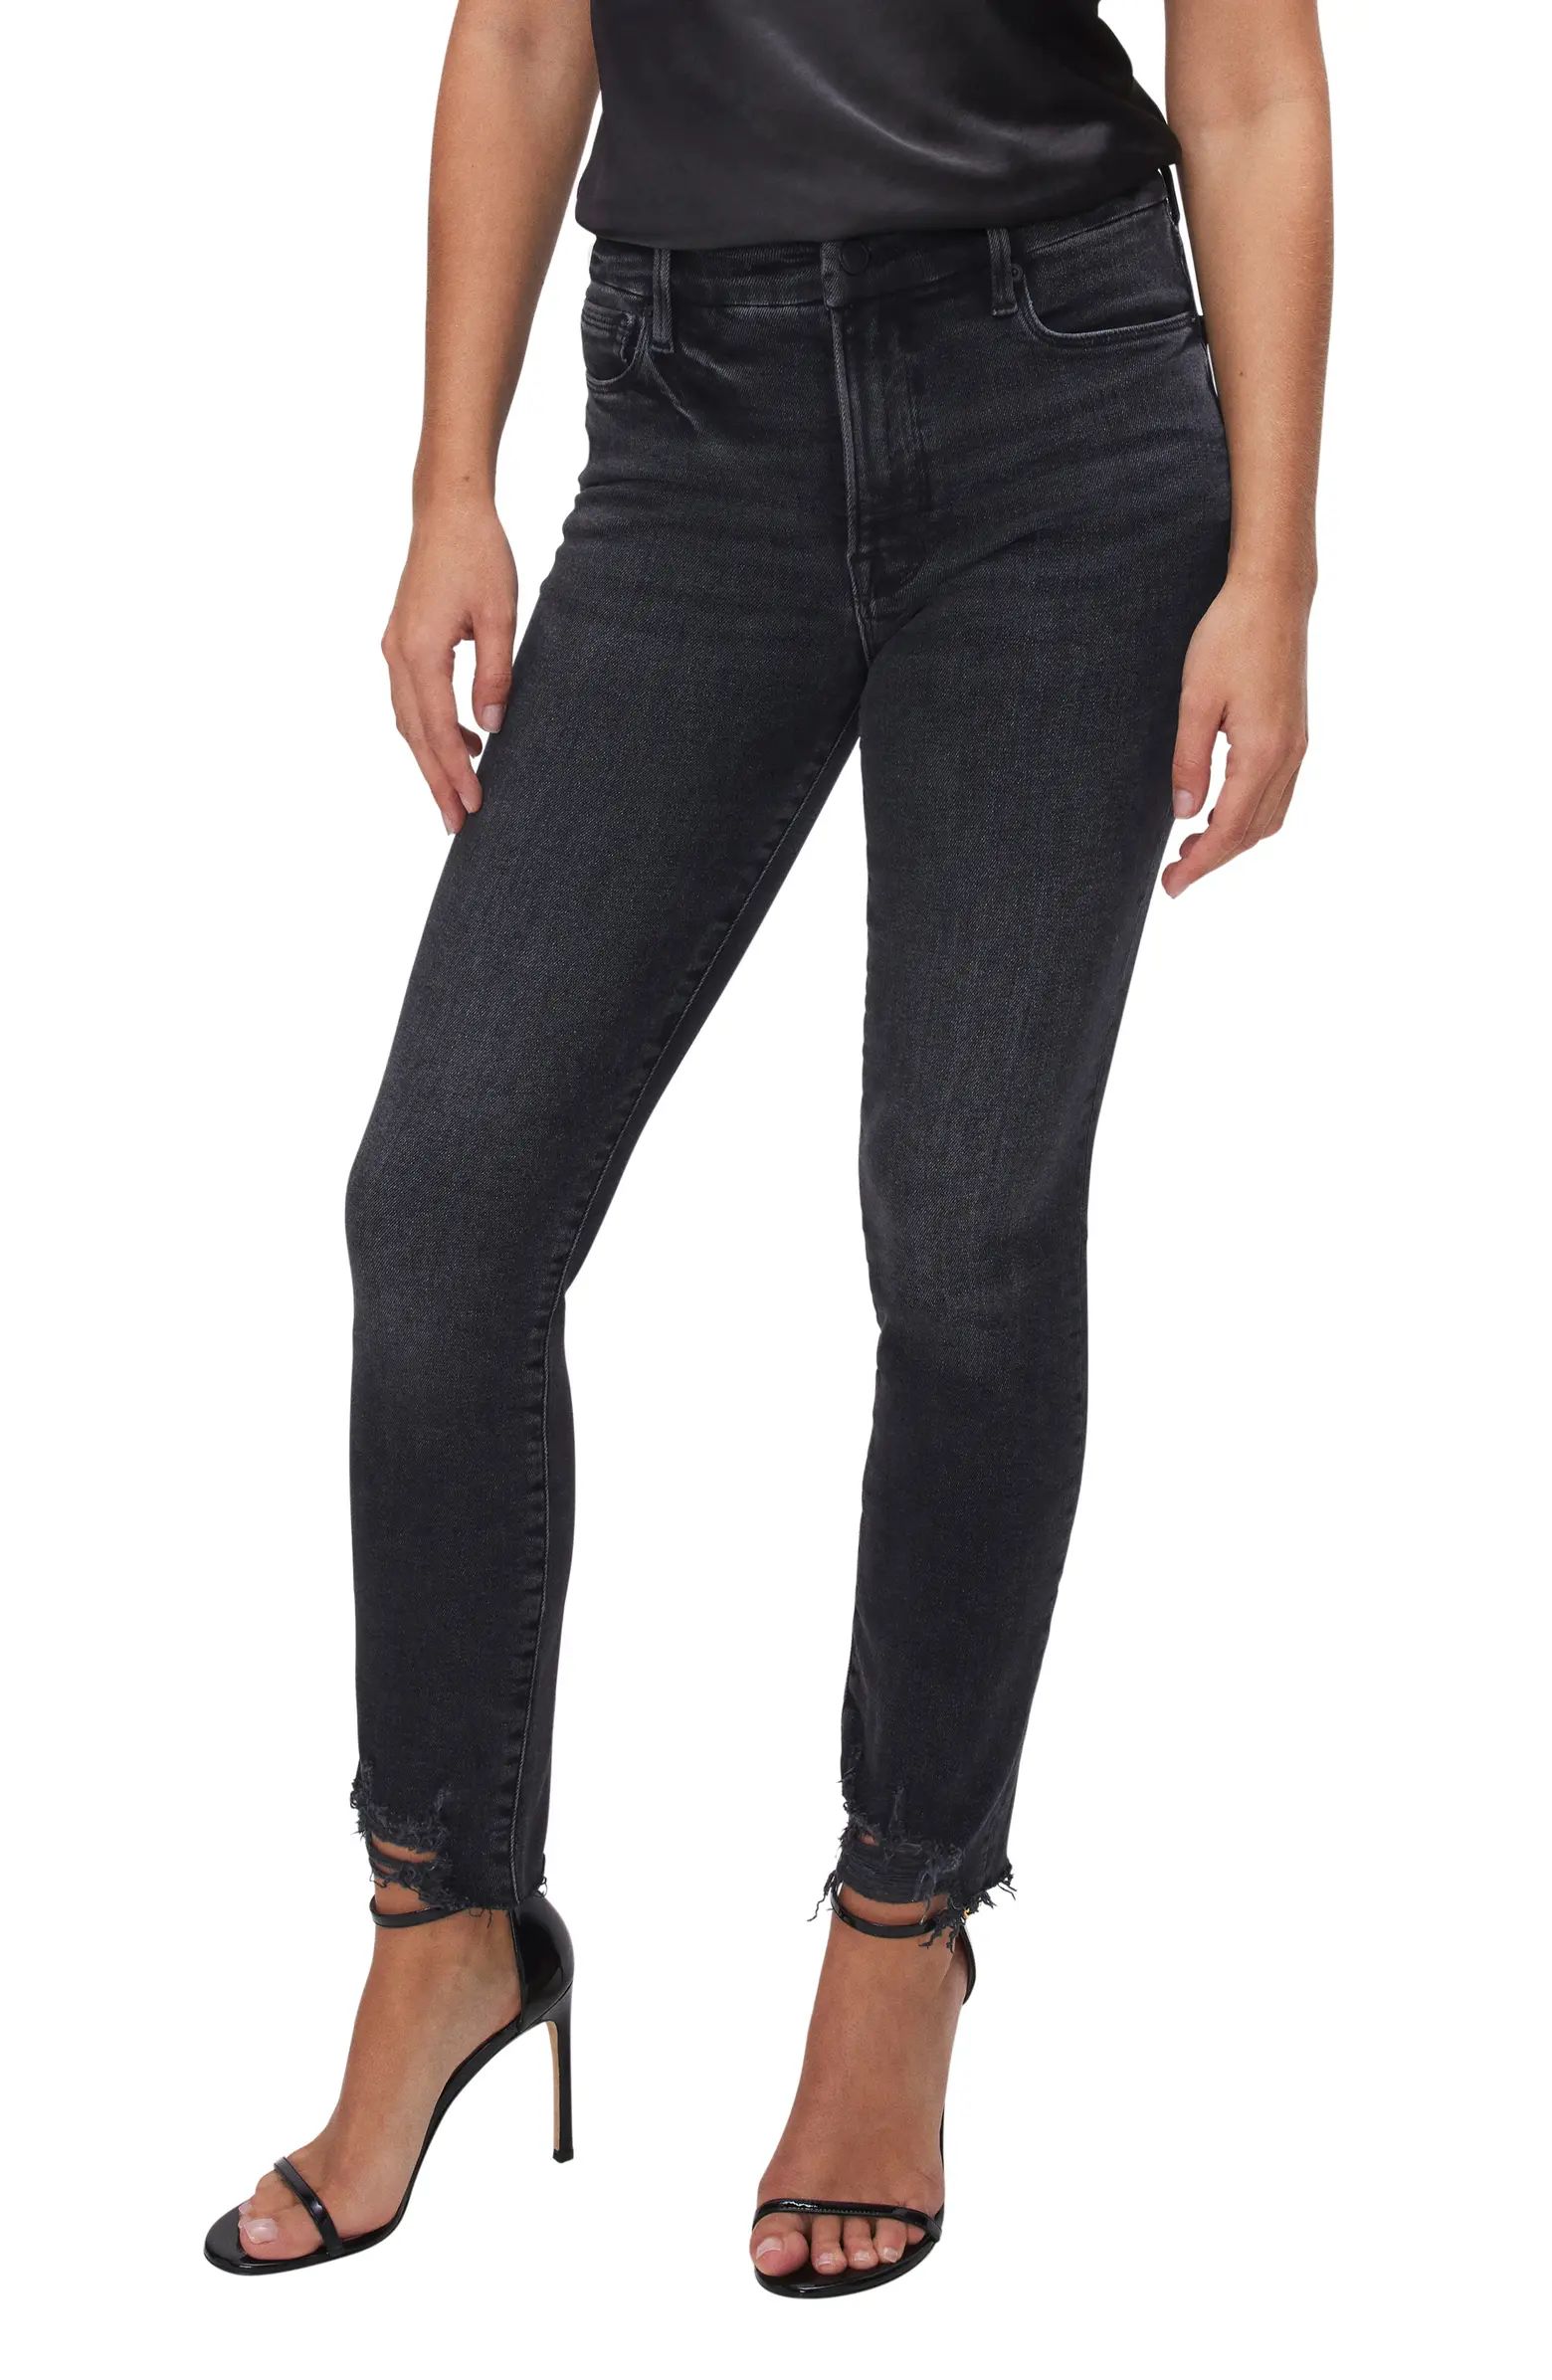 Good Classic Chewed High Waist Ankle Skinny Jeans | Nordstrom